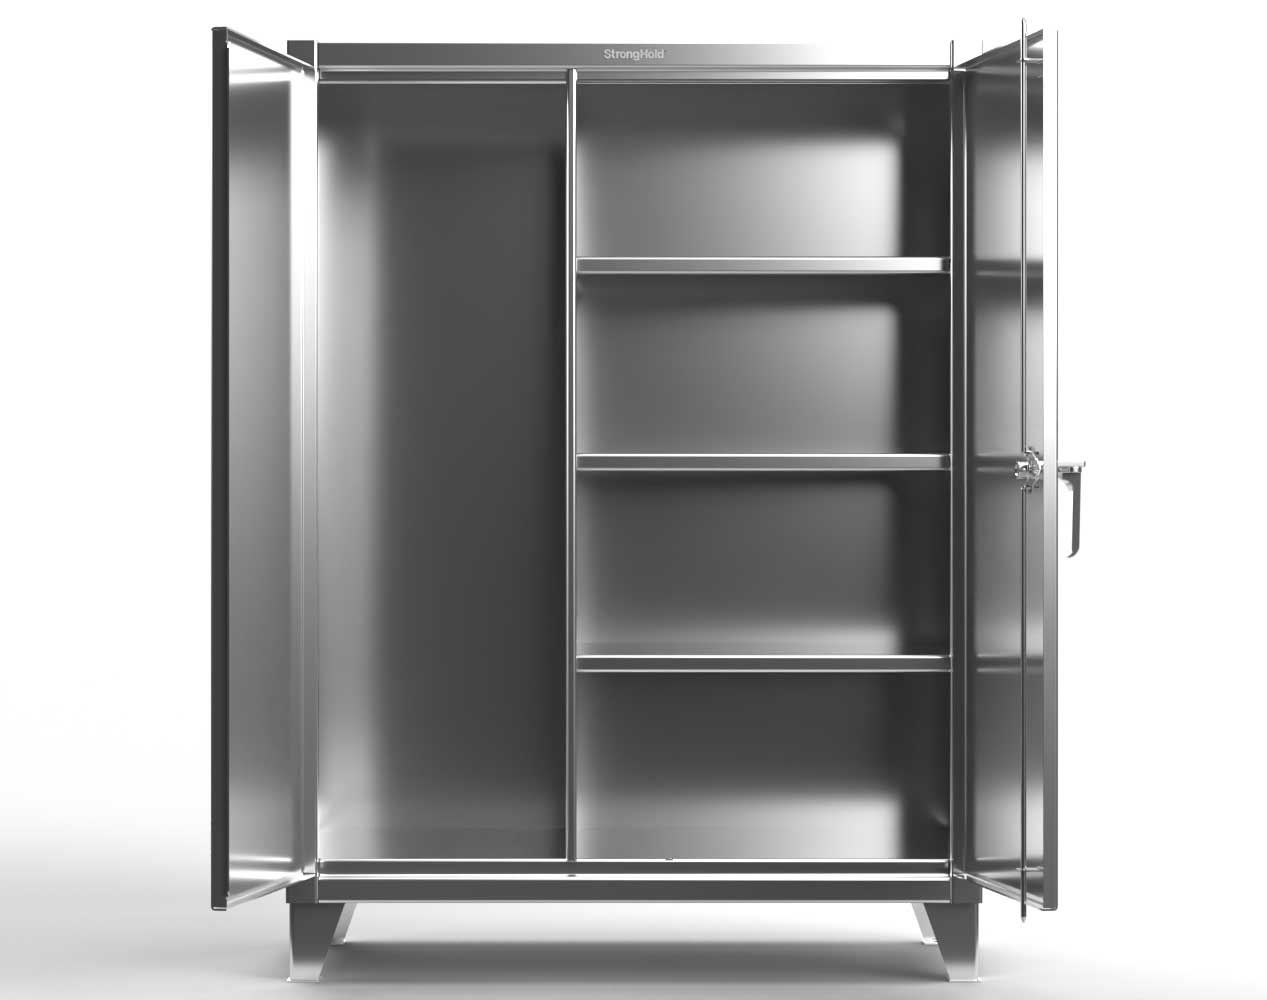 Extreme Duty 12 GA Stainless Steel Janitorial Cabinet with 3 Shelves - 72 In. W x 24 In. D x 66 In. H